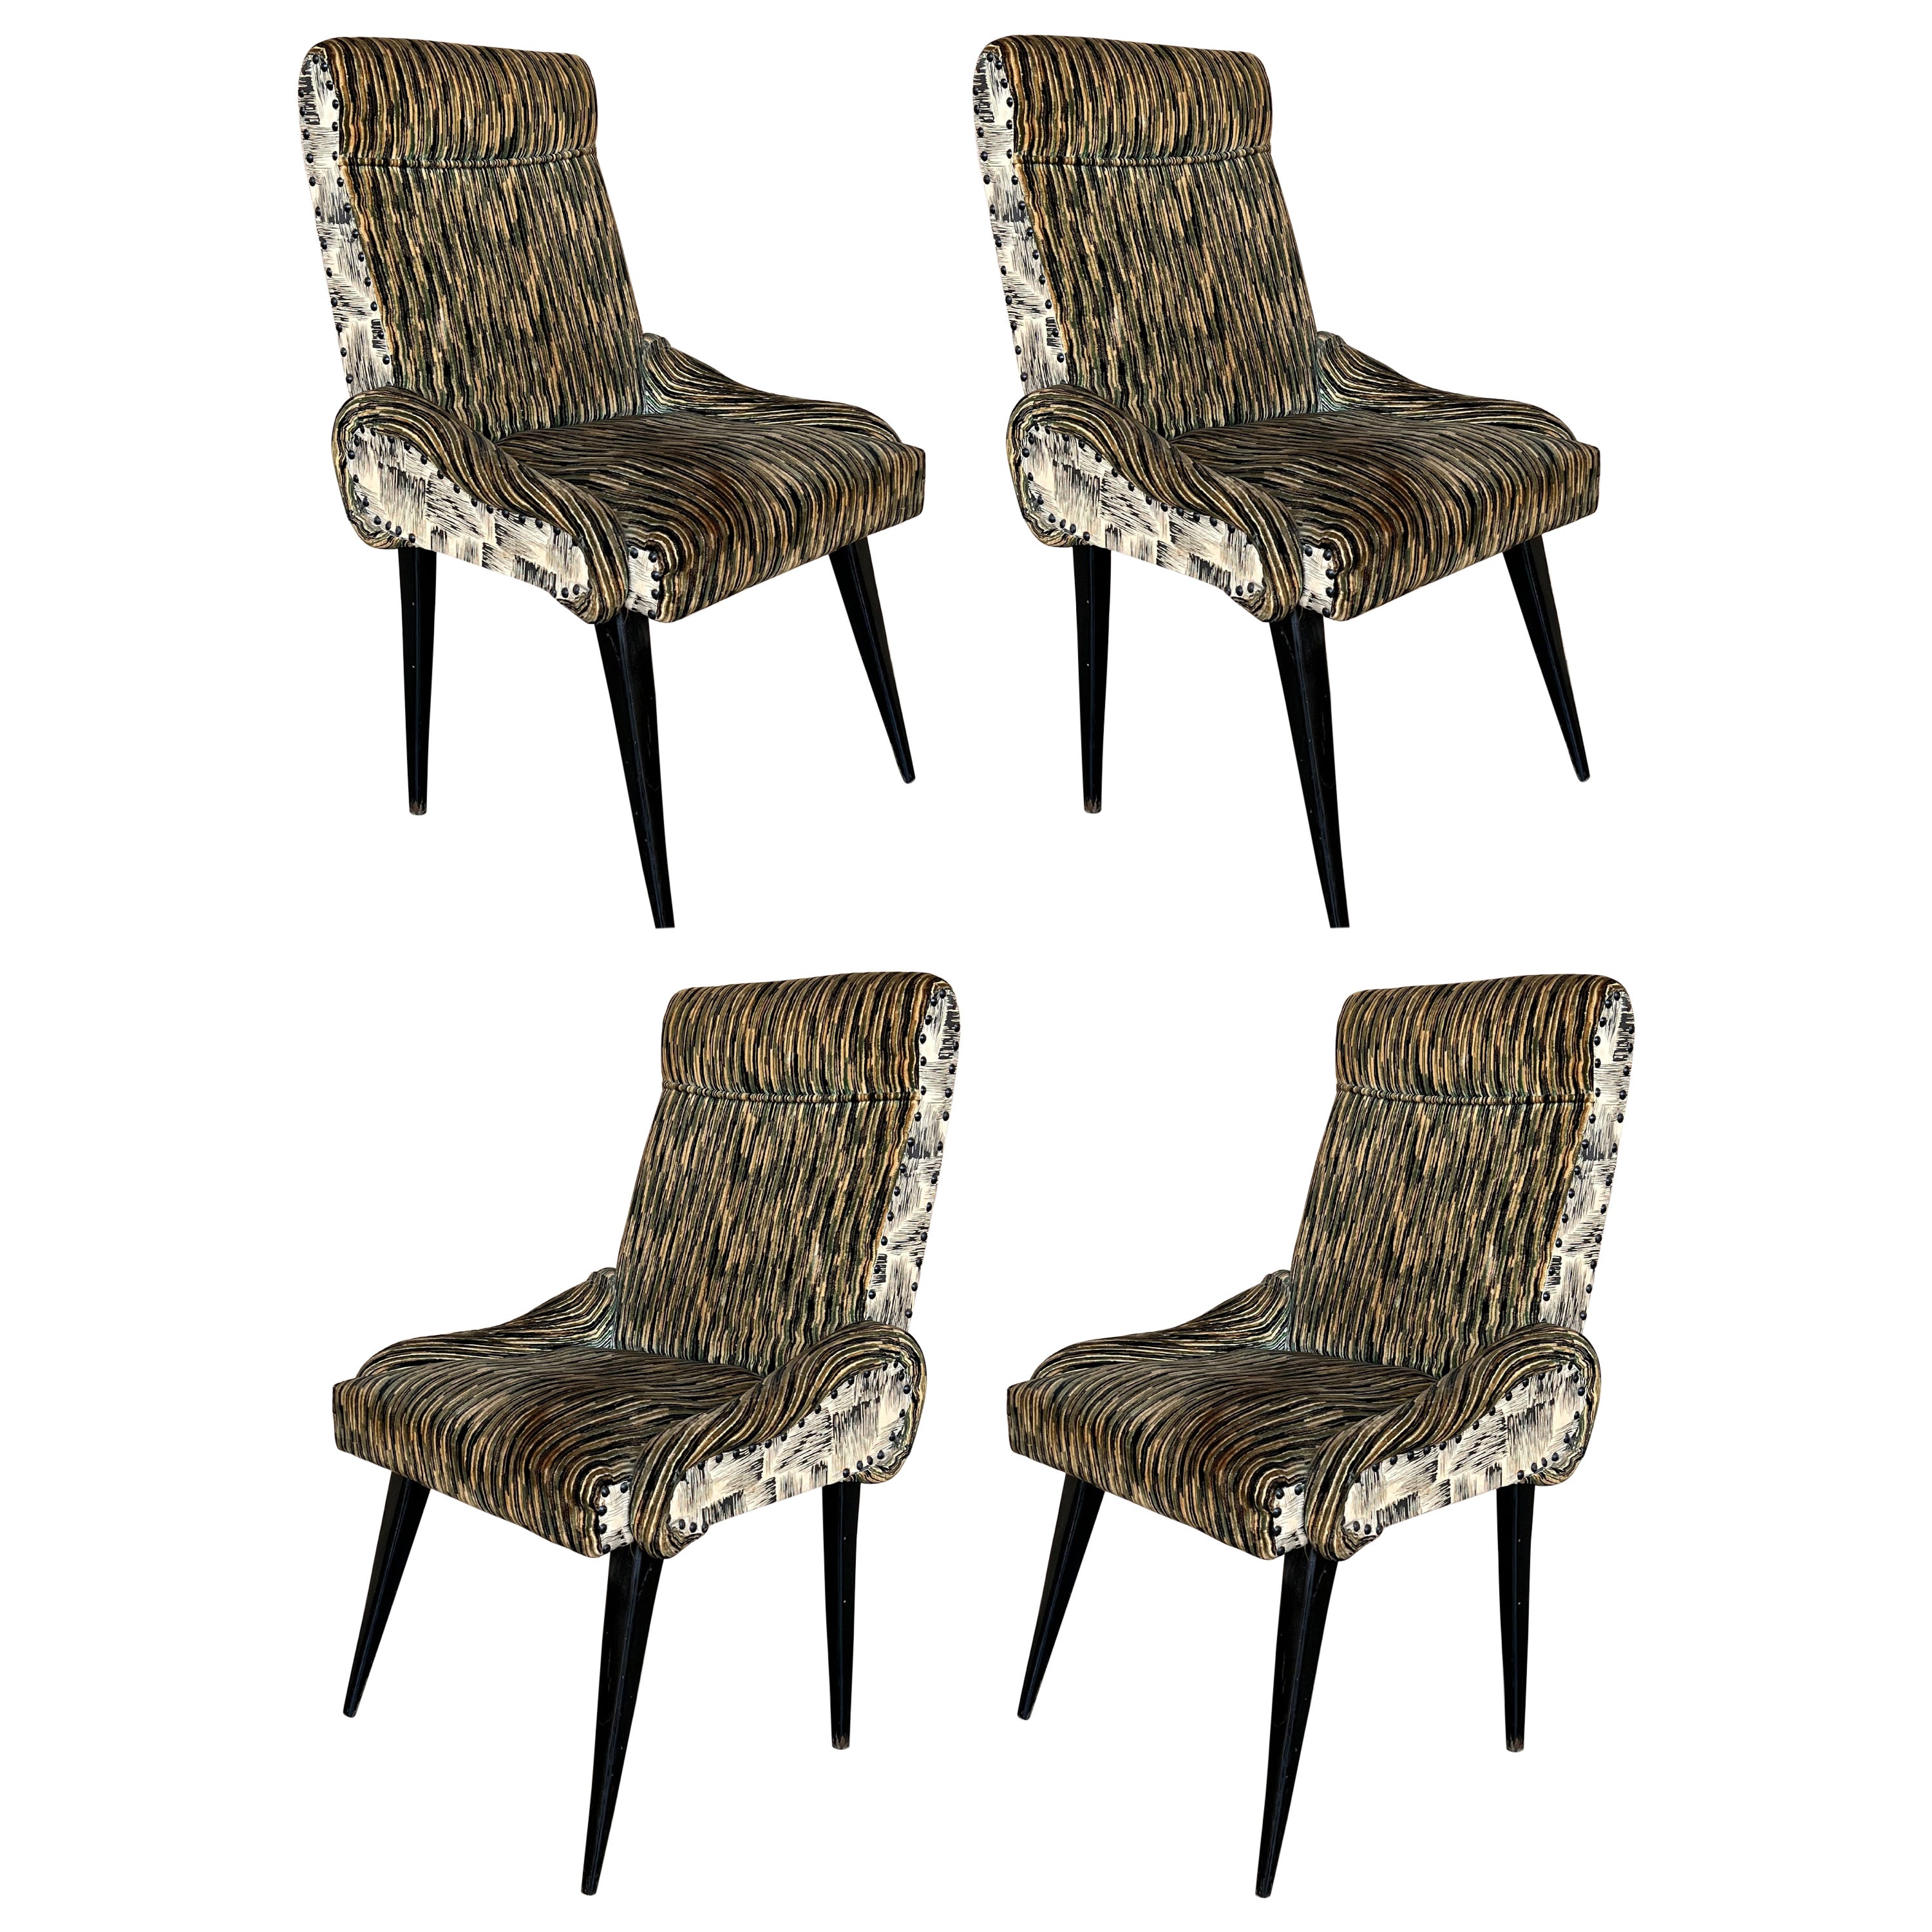 Italian Mid-Century Modern Set of 4 Chair in the Gio Point Style For Sale